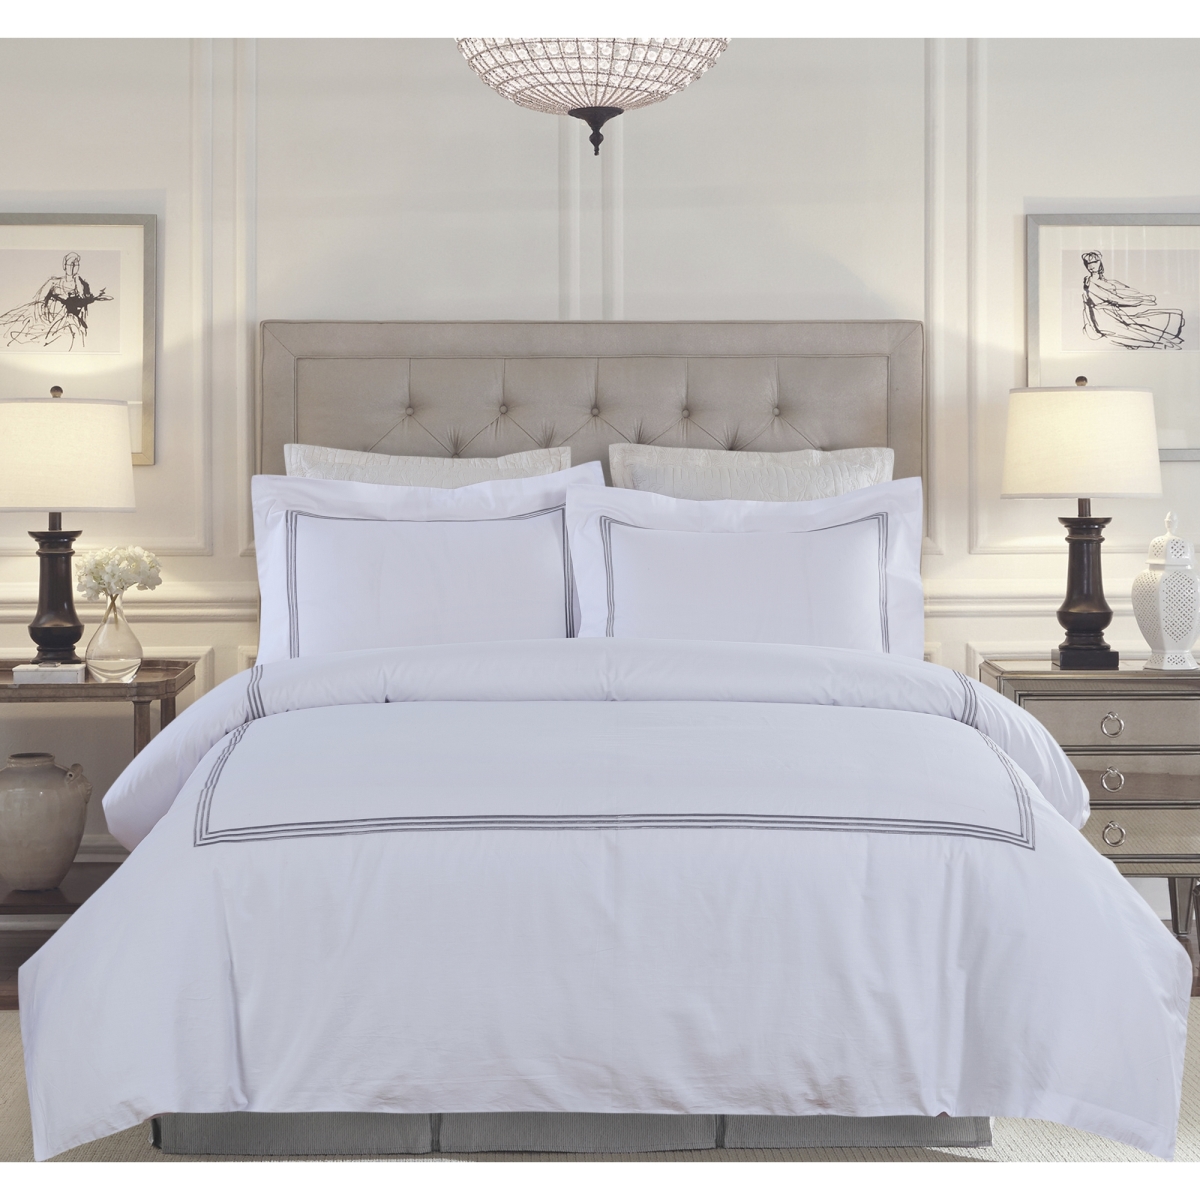 Whtx606-svq Silver Line Embroidery On White 300 Thread Count Cotton Sateen Duvet Set - Queen Size - 3 Piece